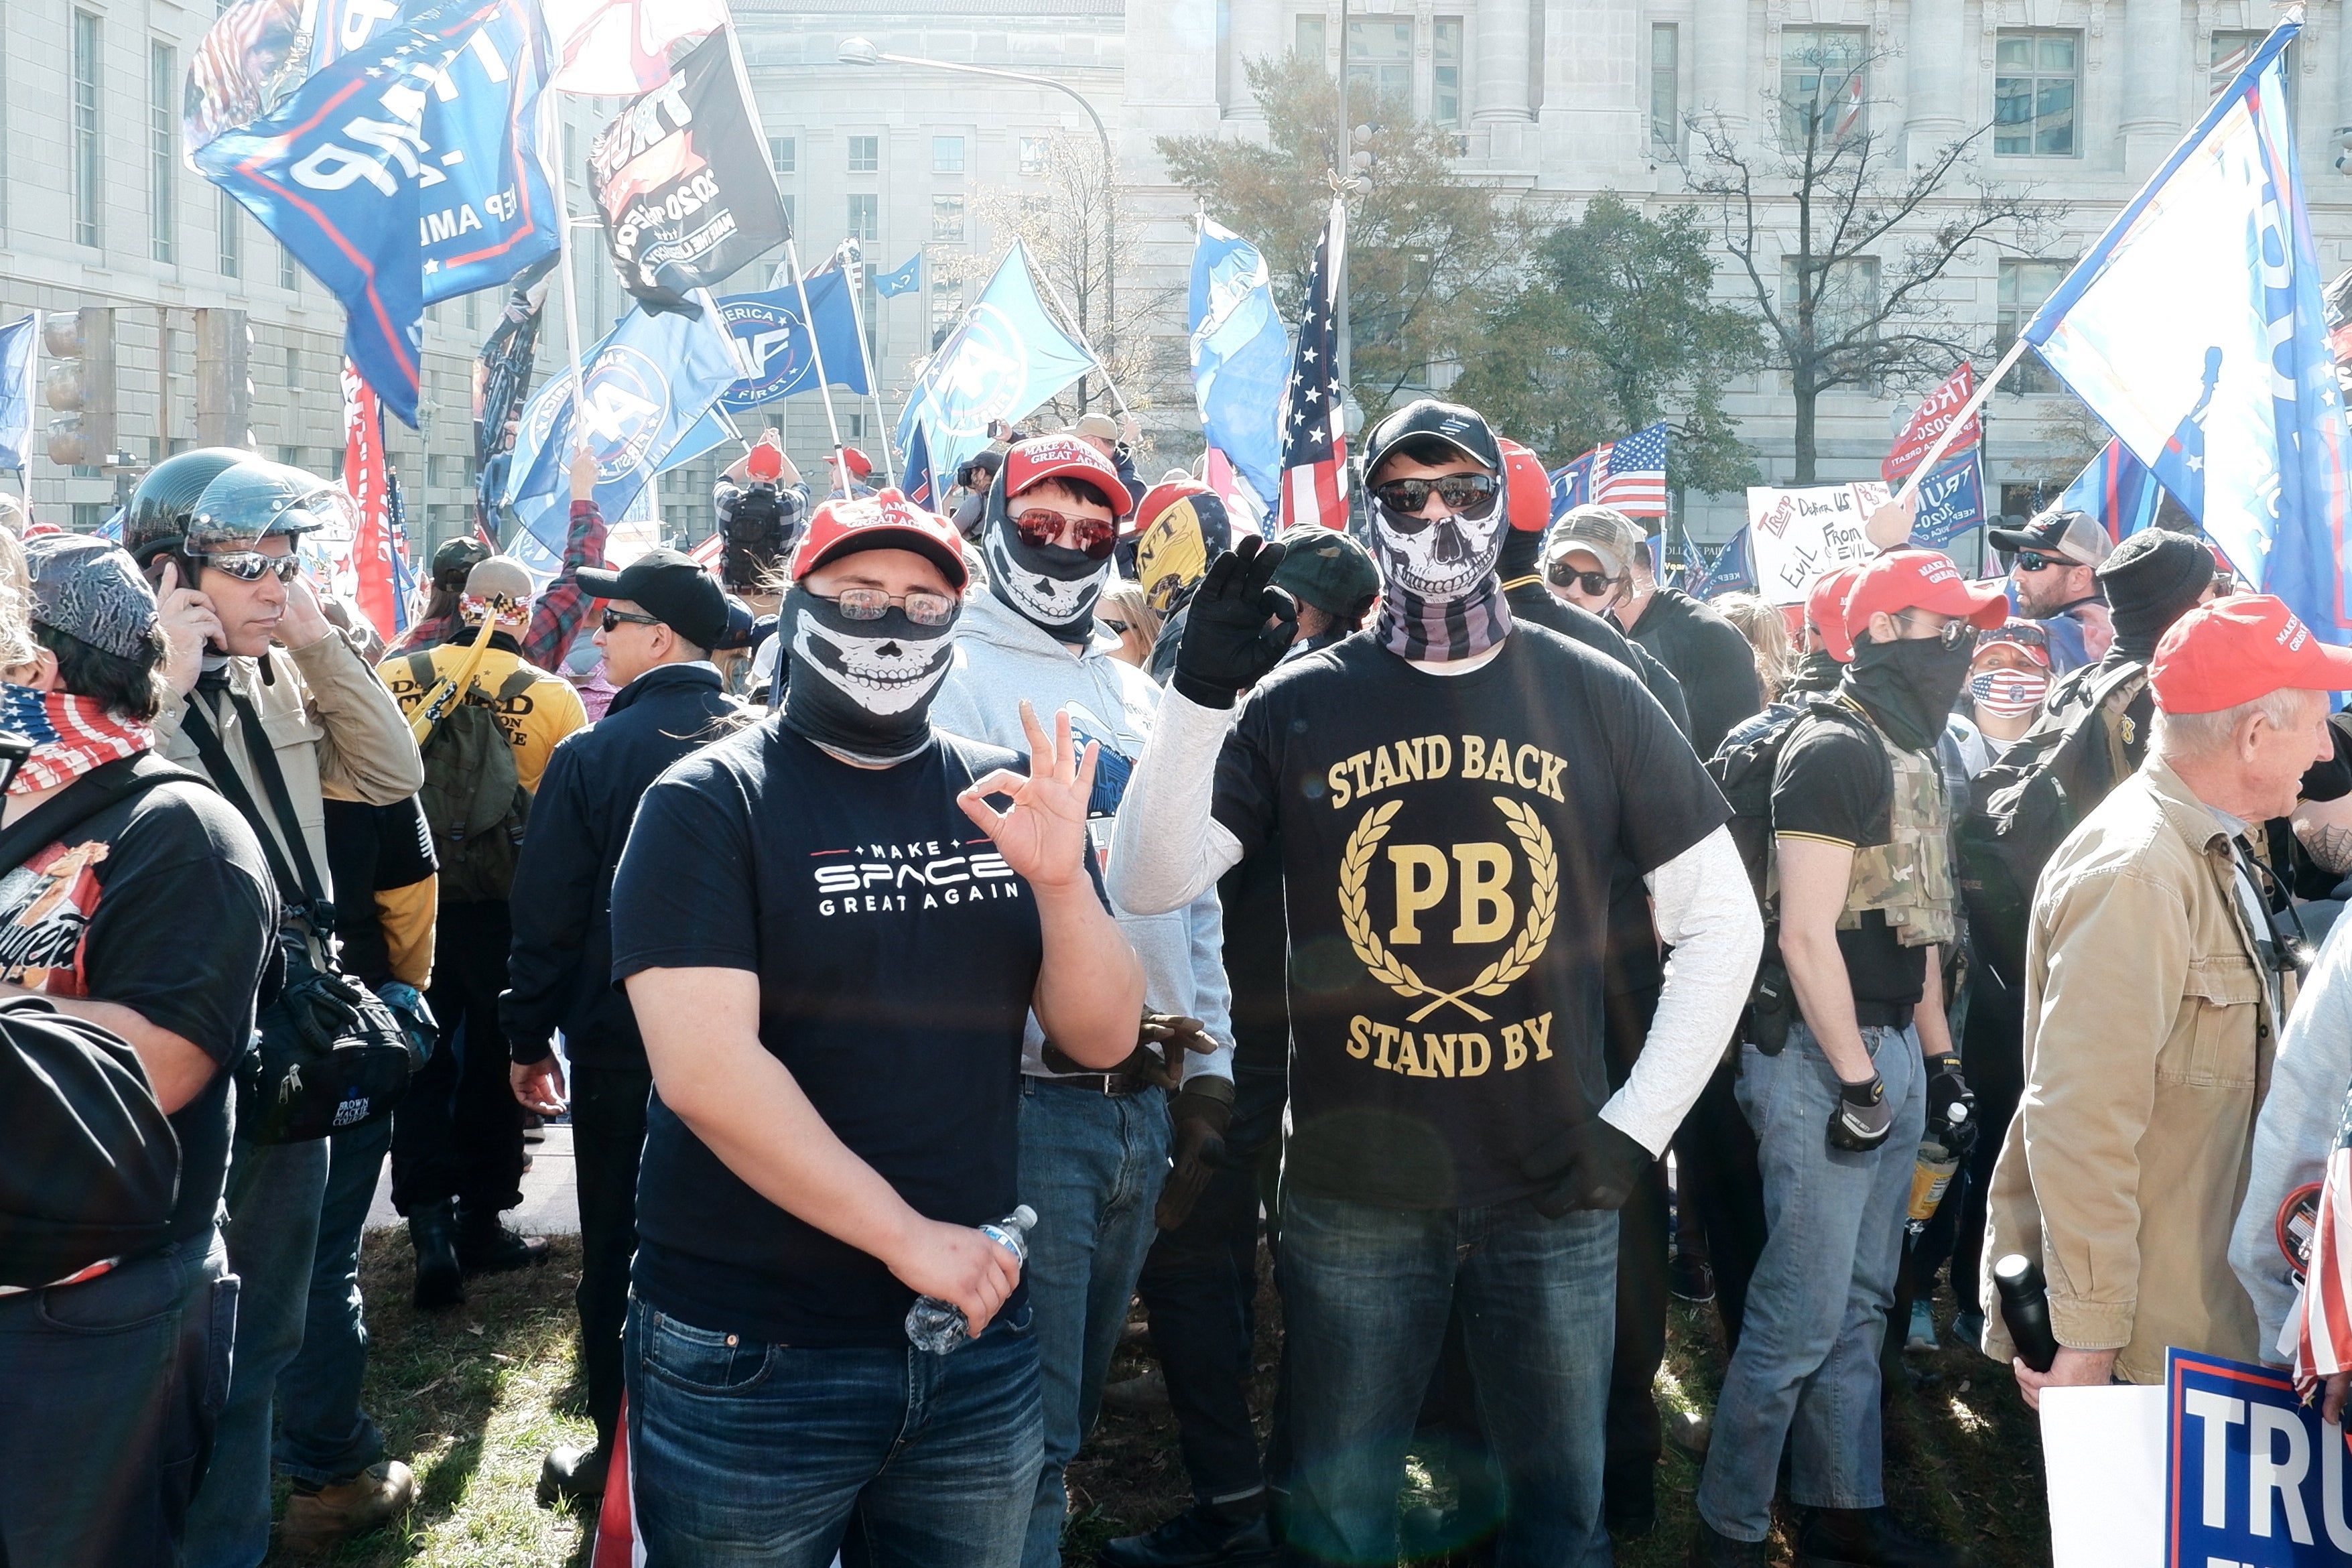 Two people, one of them with a Proud Boys shirt, gesture with the White Power sign, as supporters of Trump gather in Freedom Plaza, in Washington, DC